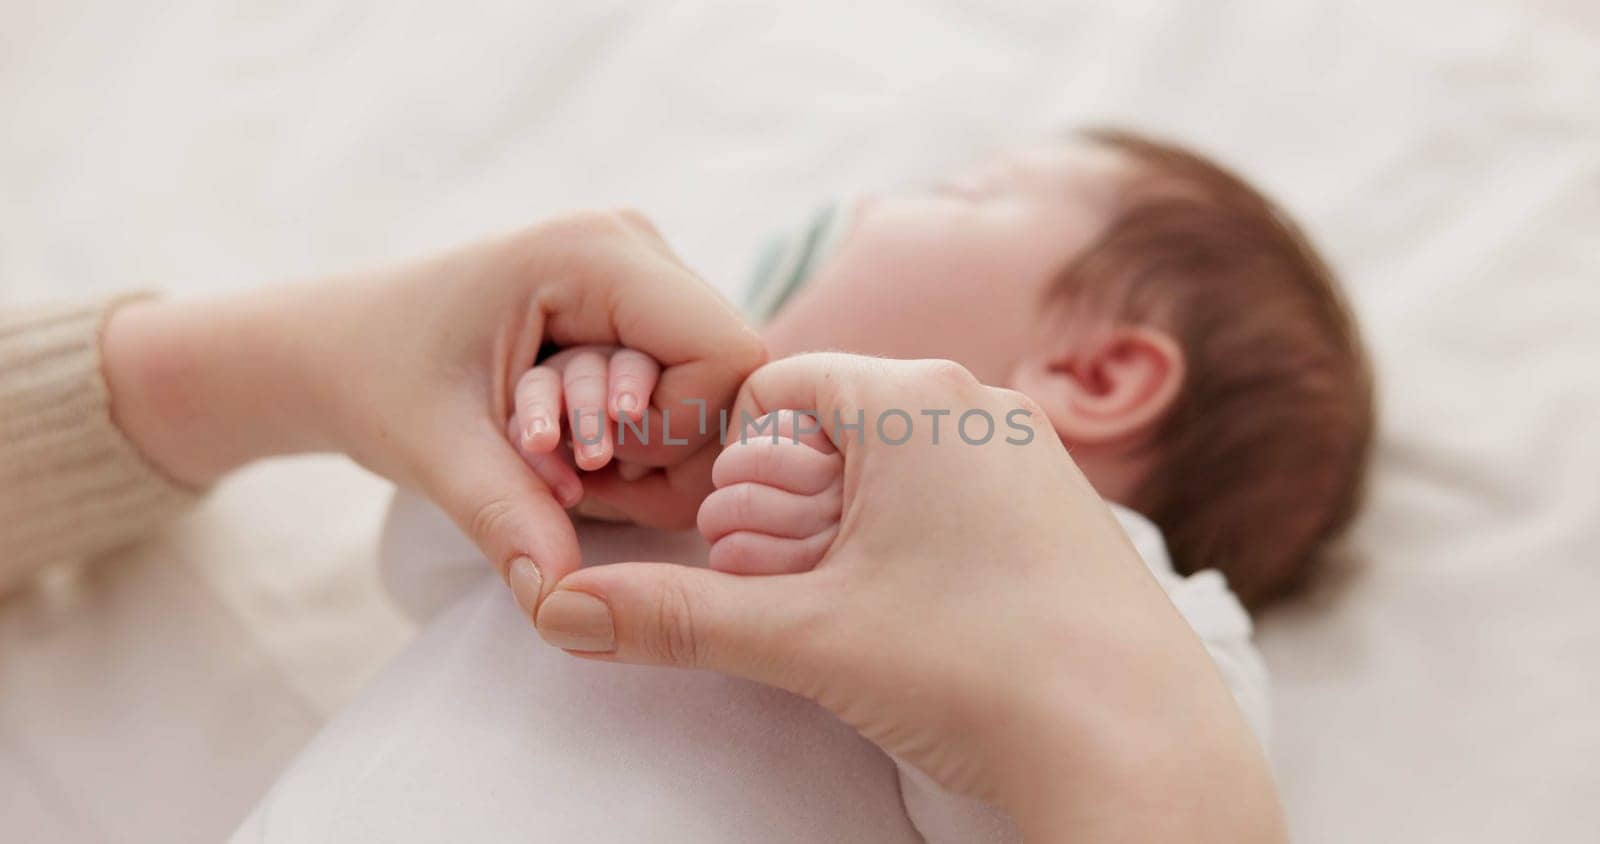 Bed, holding hands and mother with baby, love and support for care, health and wellness at home. Fingers, family or mama with a healthy infant, protection and child development with bond or maternity.